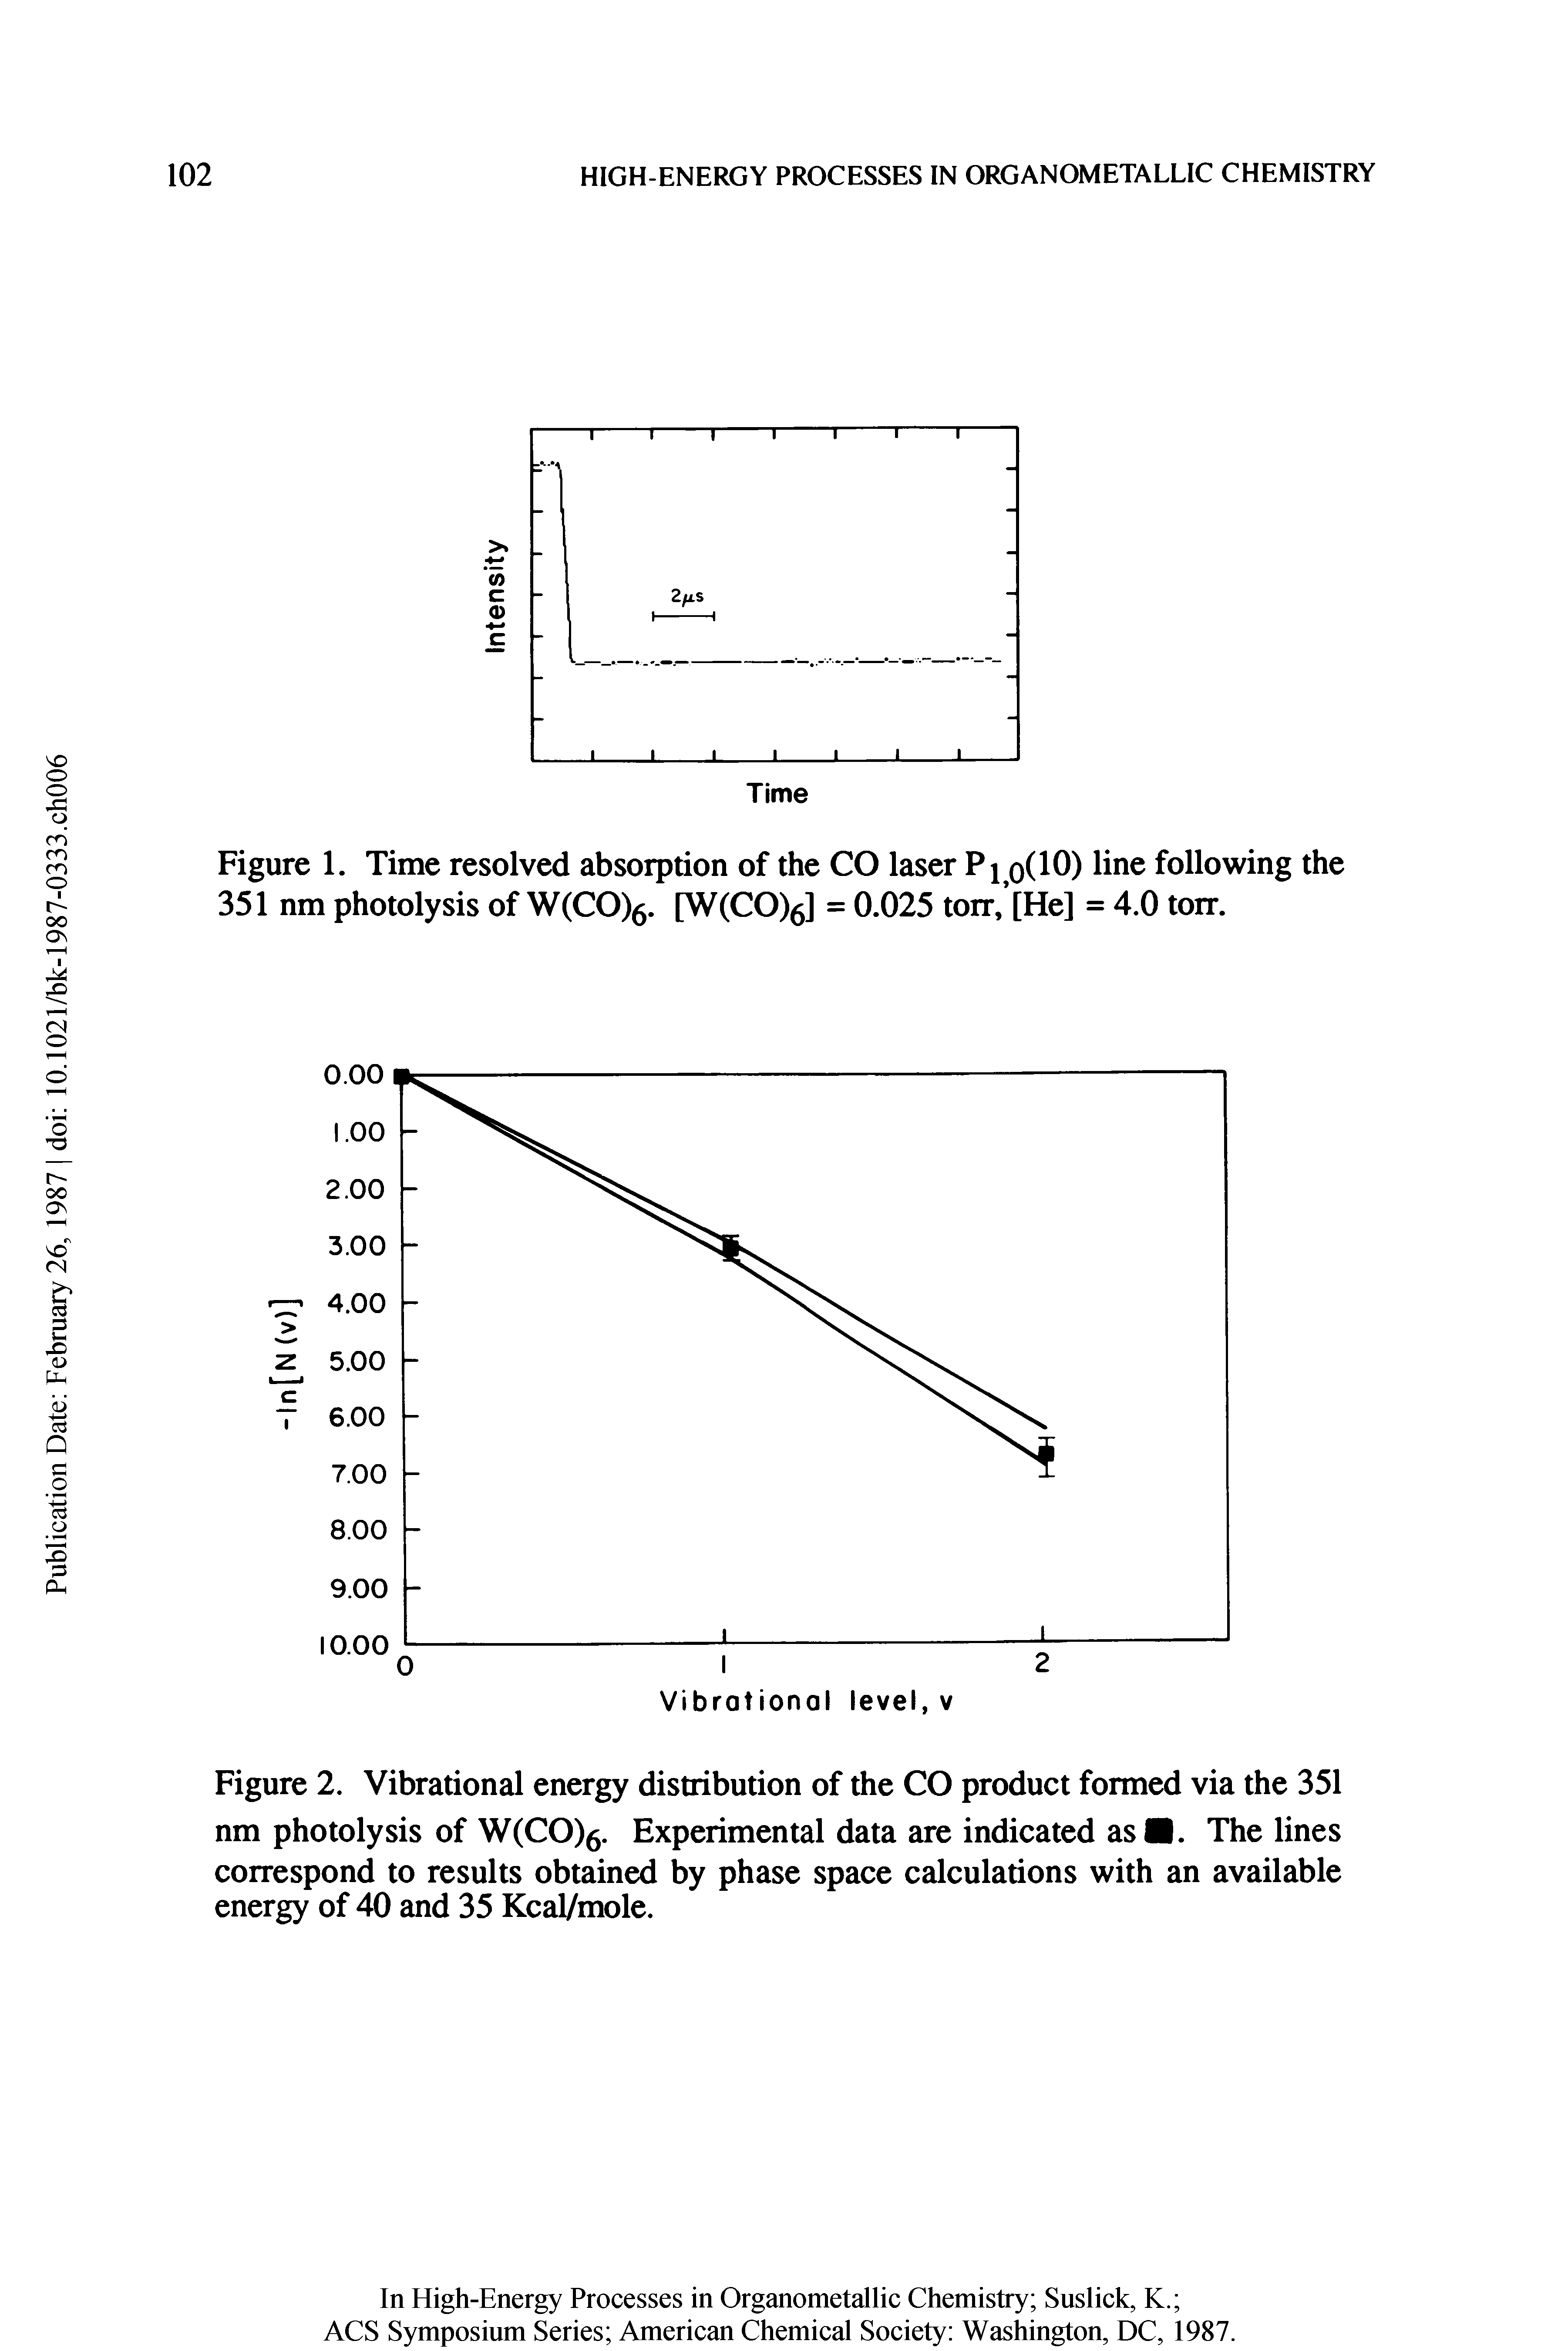 Figure 1. Time resolved absorption of the CO laser P 1,0(10) line following the 351 nm photolysis of W(CO)g. [W(CO)g] = 0.025 toir, [He] = 4.0 toir.